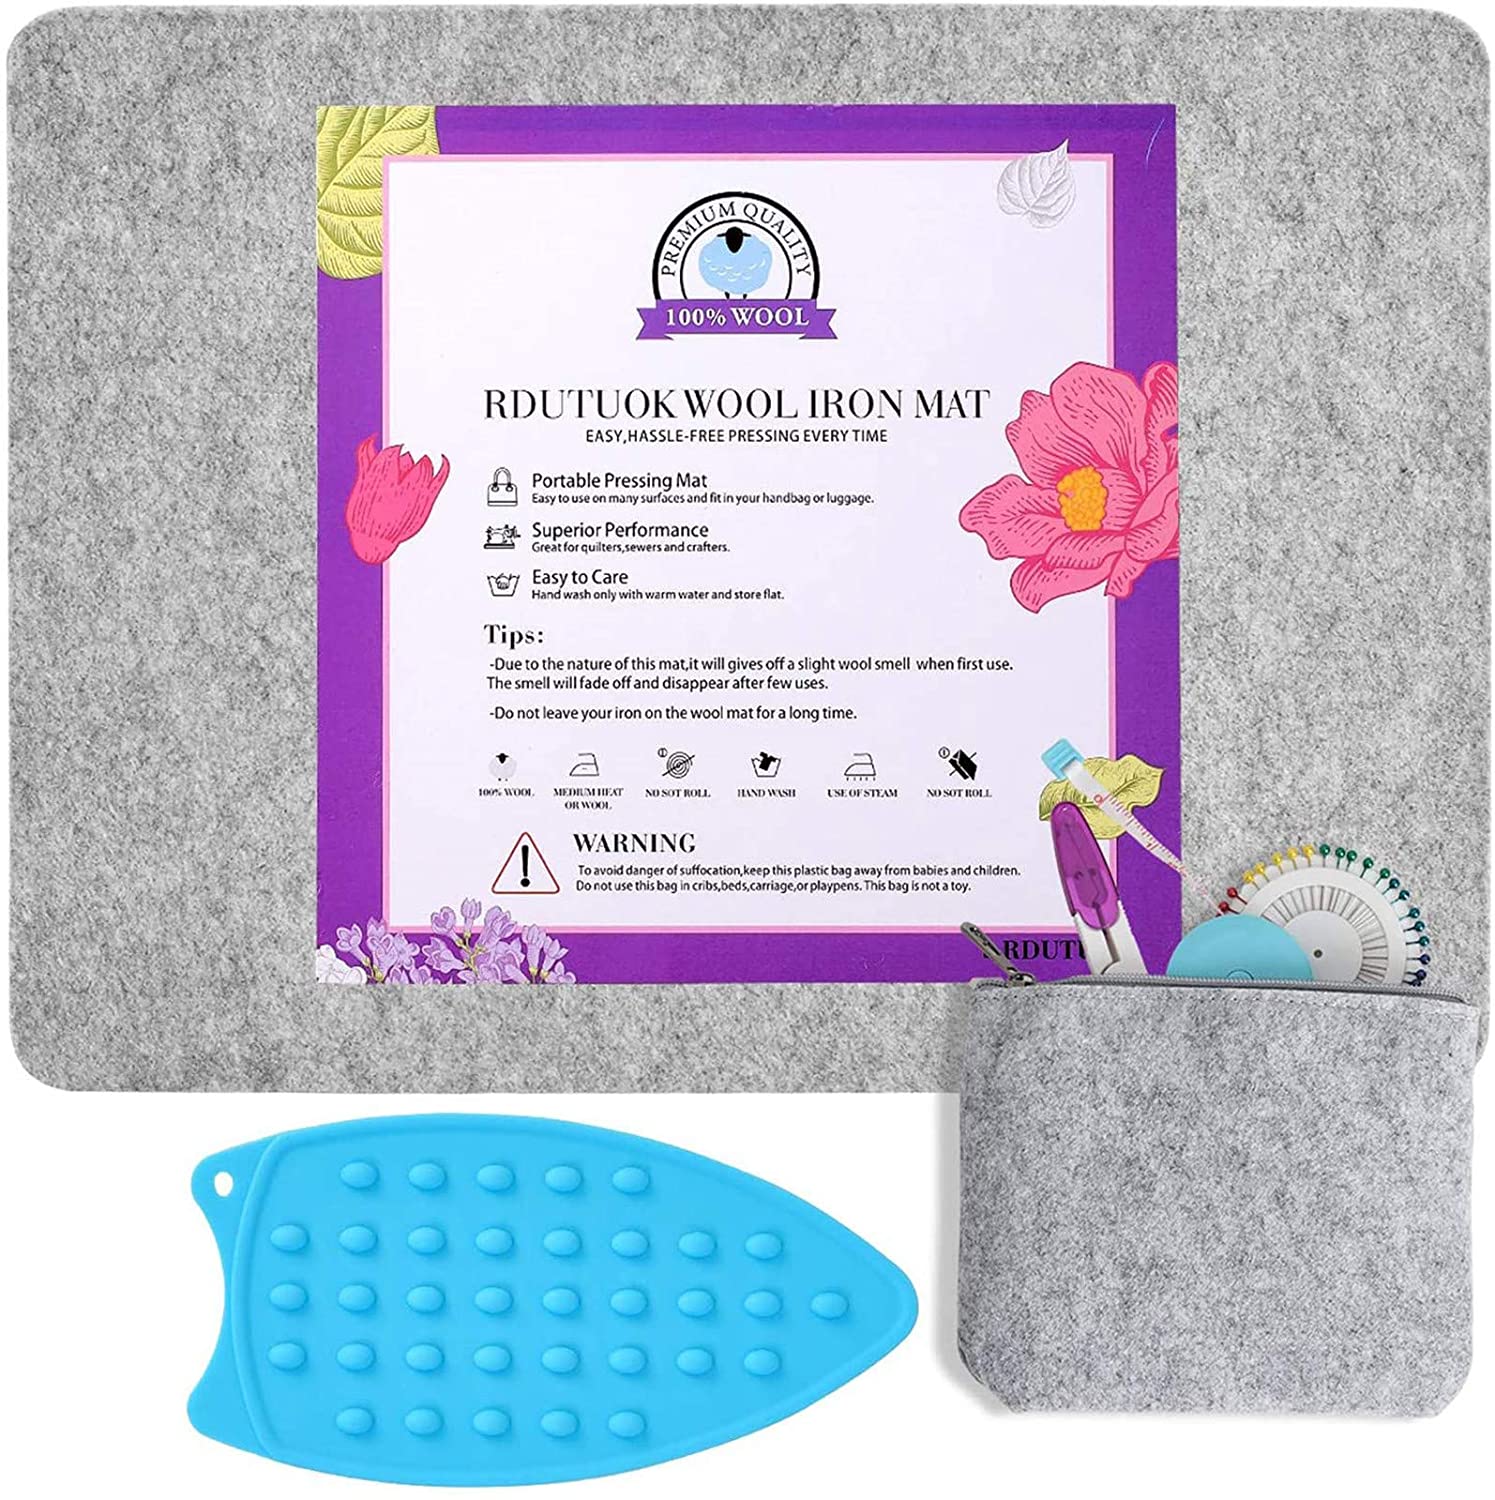 Wool Pressing Mat for Quilting Portable Felted Wool Ironing Mat for Quilters,  Crafts, Ironing, Blocking, Embroidery & More